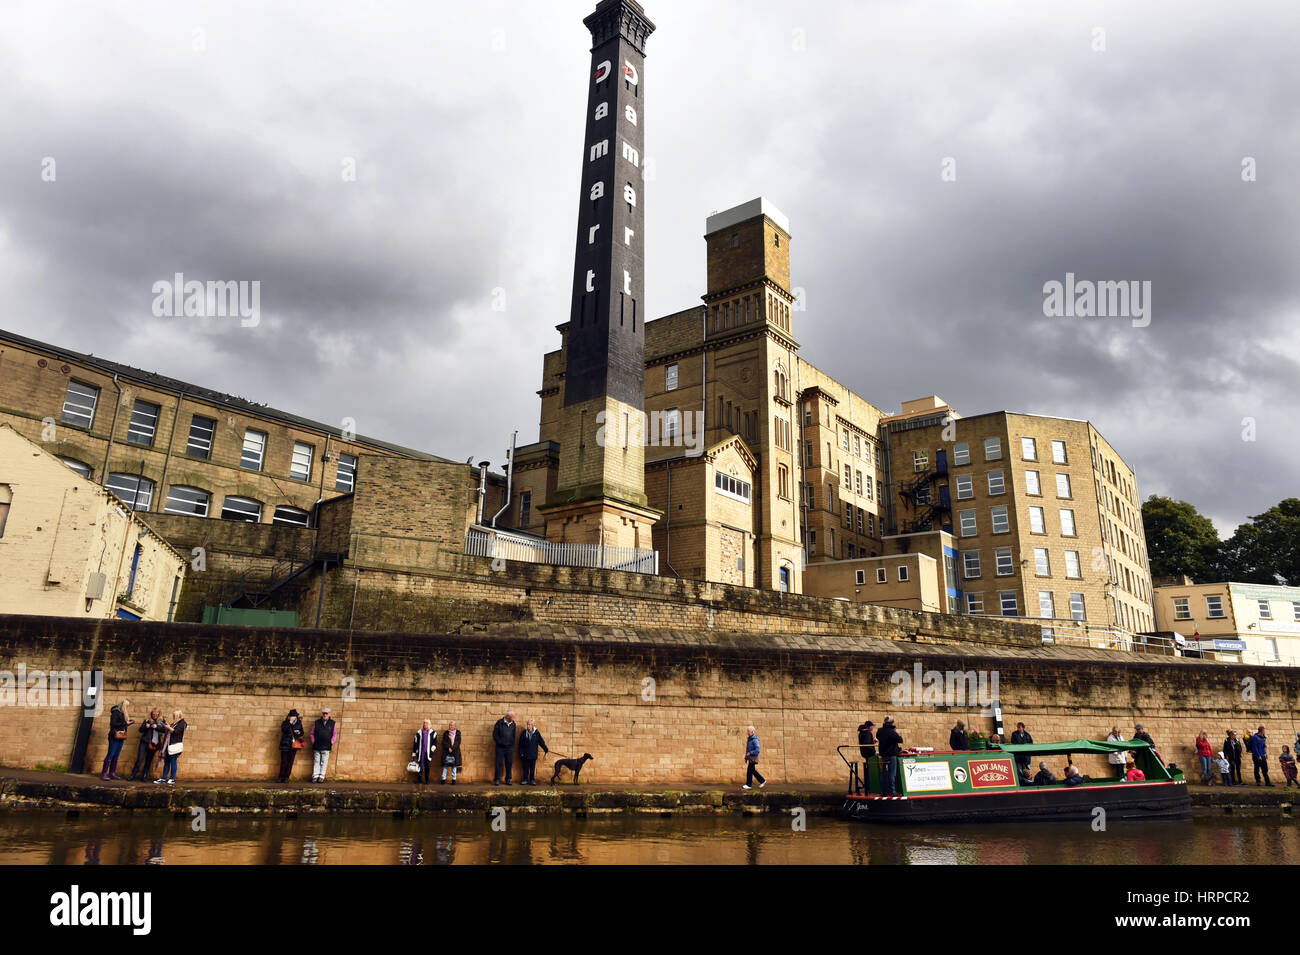 Bingley Damart Factory next to the Leeds Liverpool Canal. Stock Photo